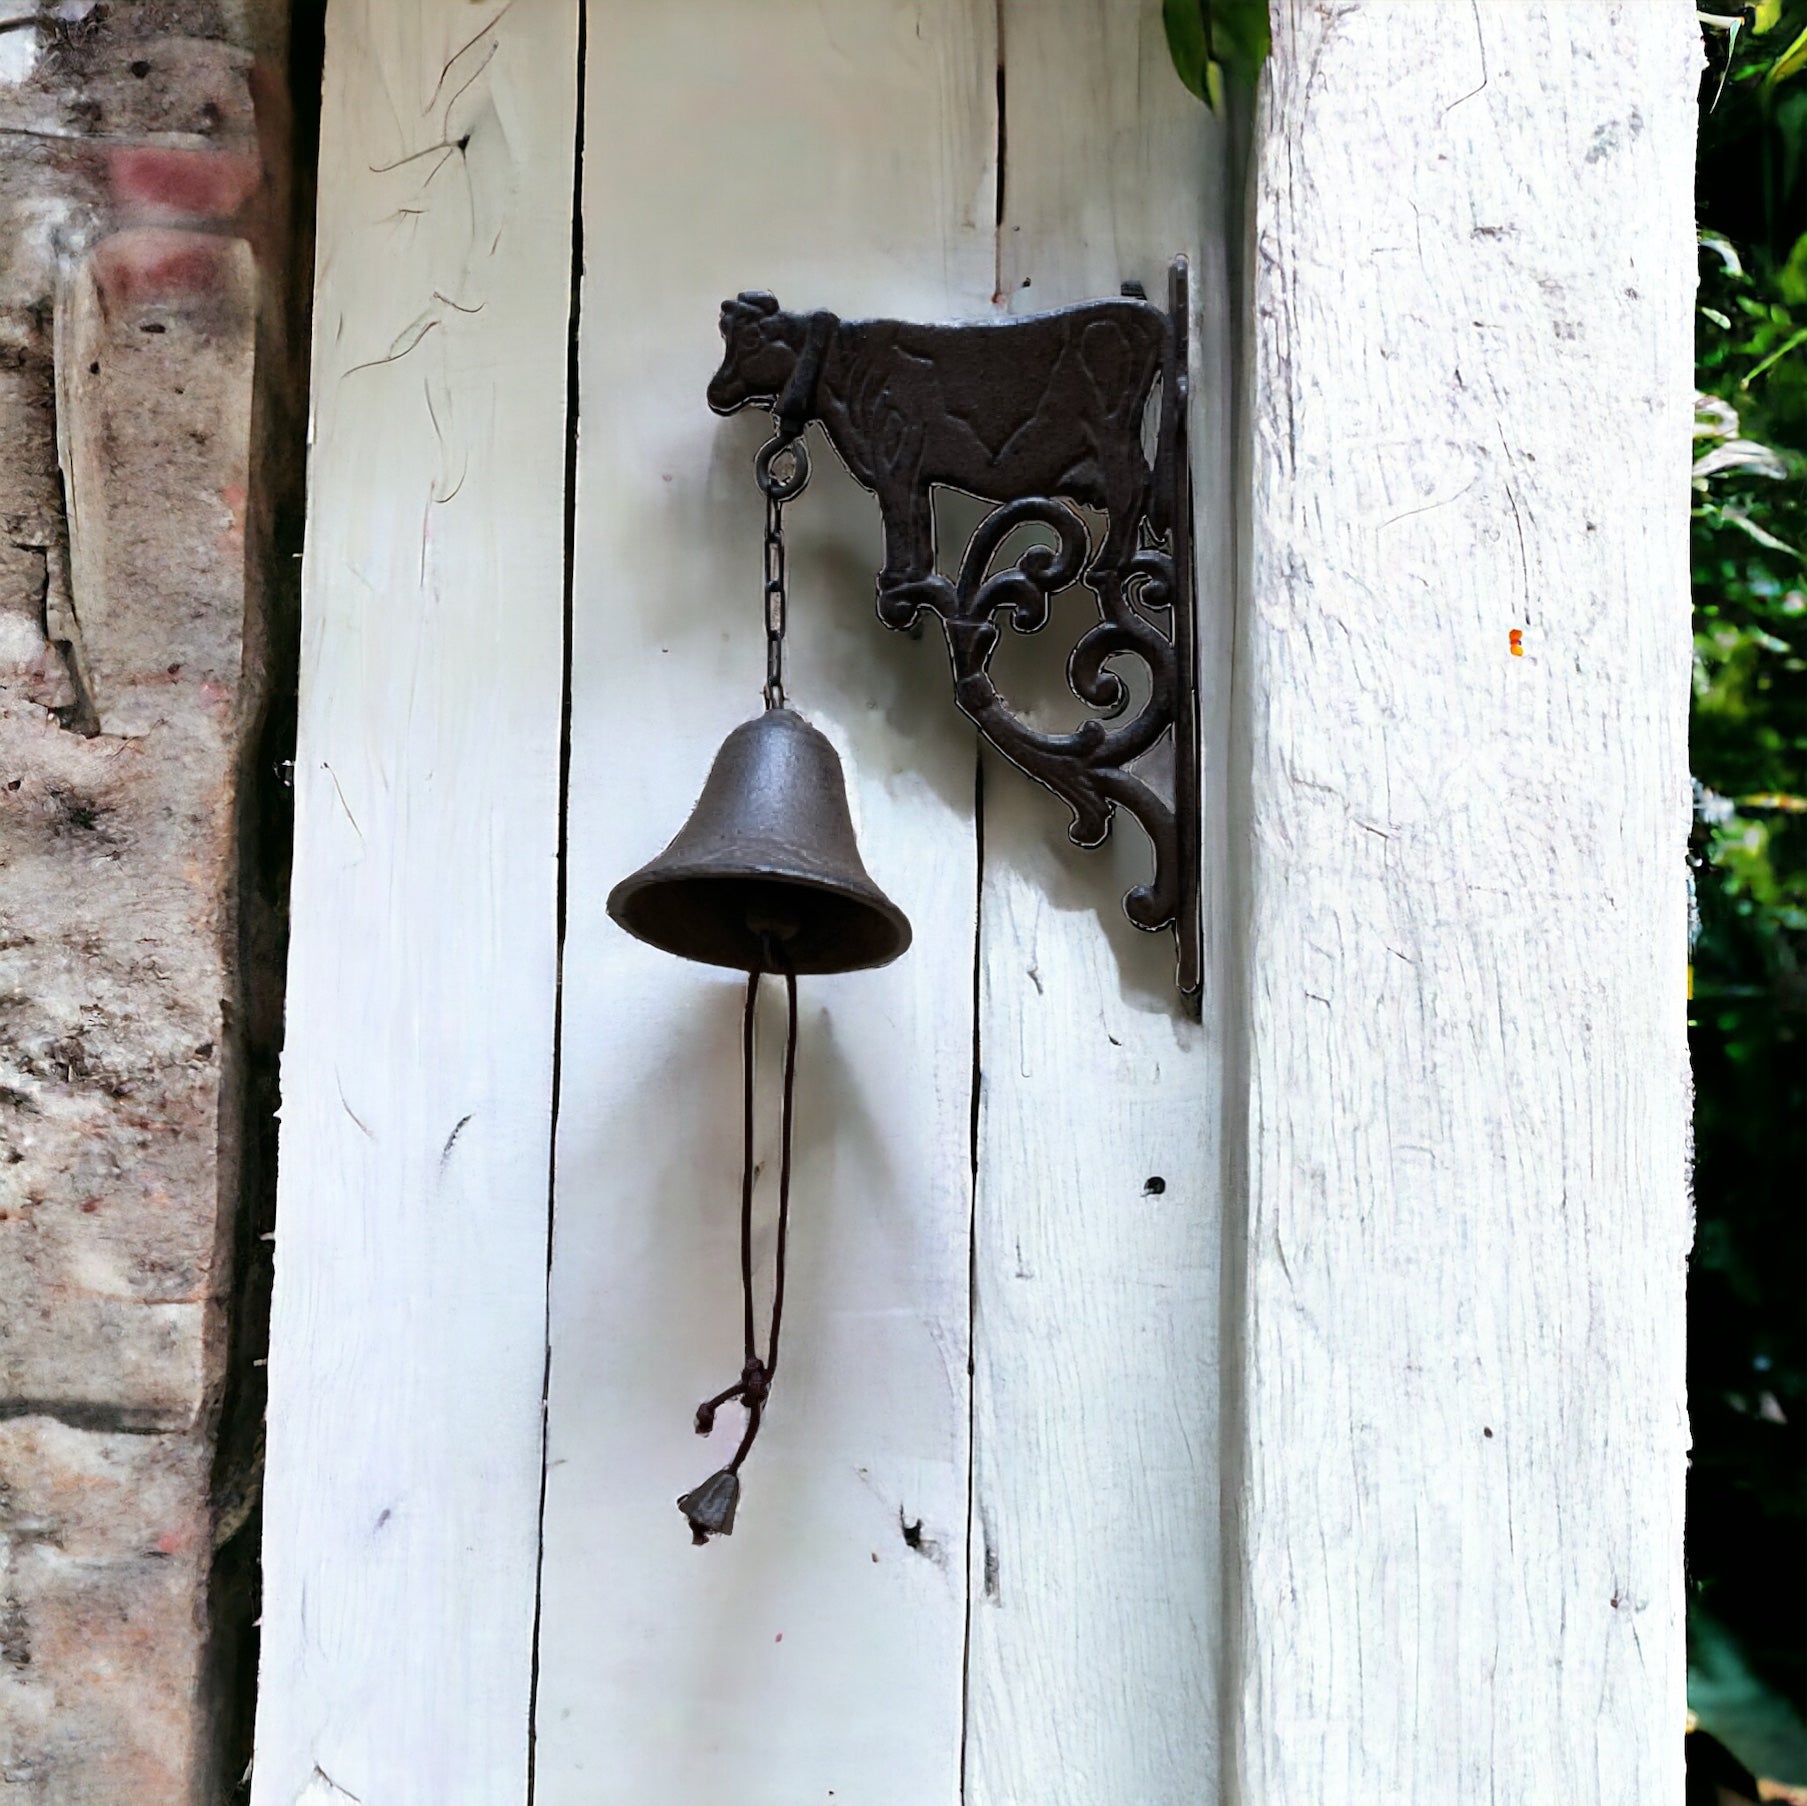 Door Bell Cow Farmhouse Country - The Renmy Store Homewares & Gifts 